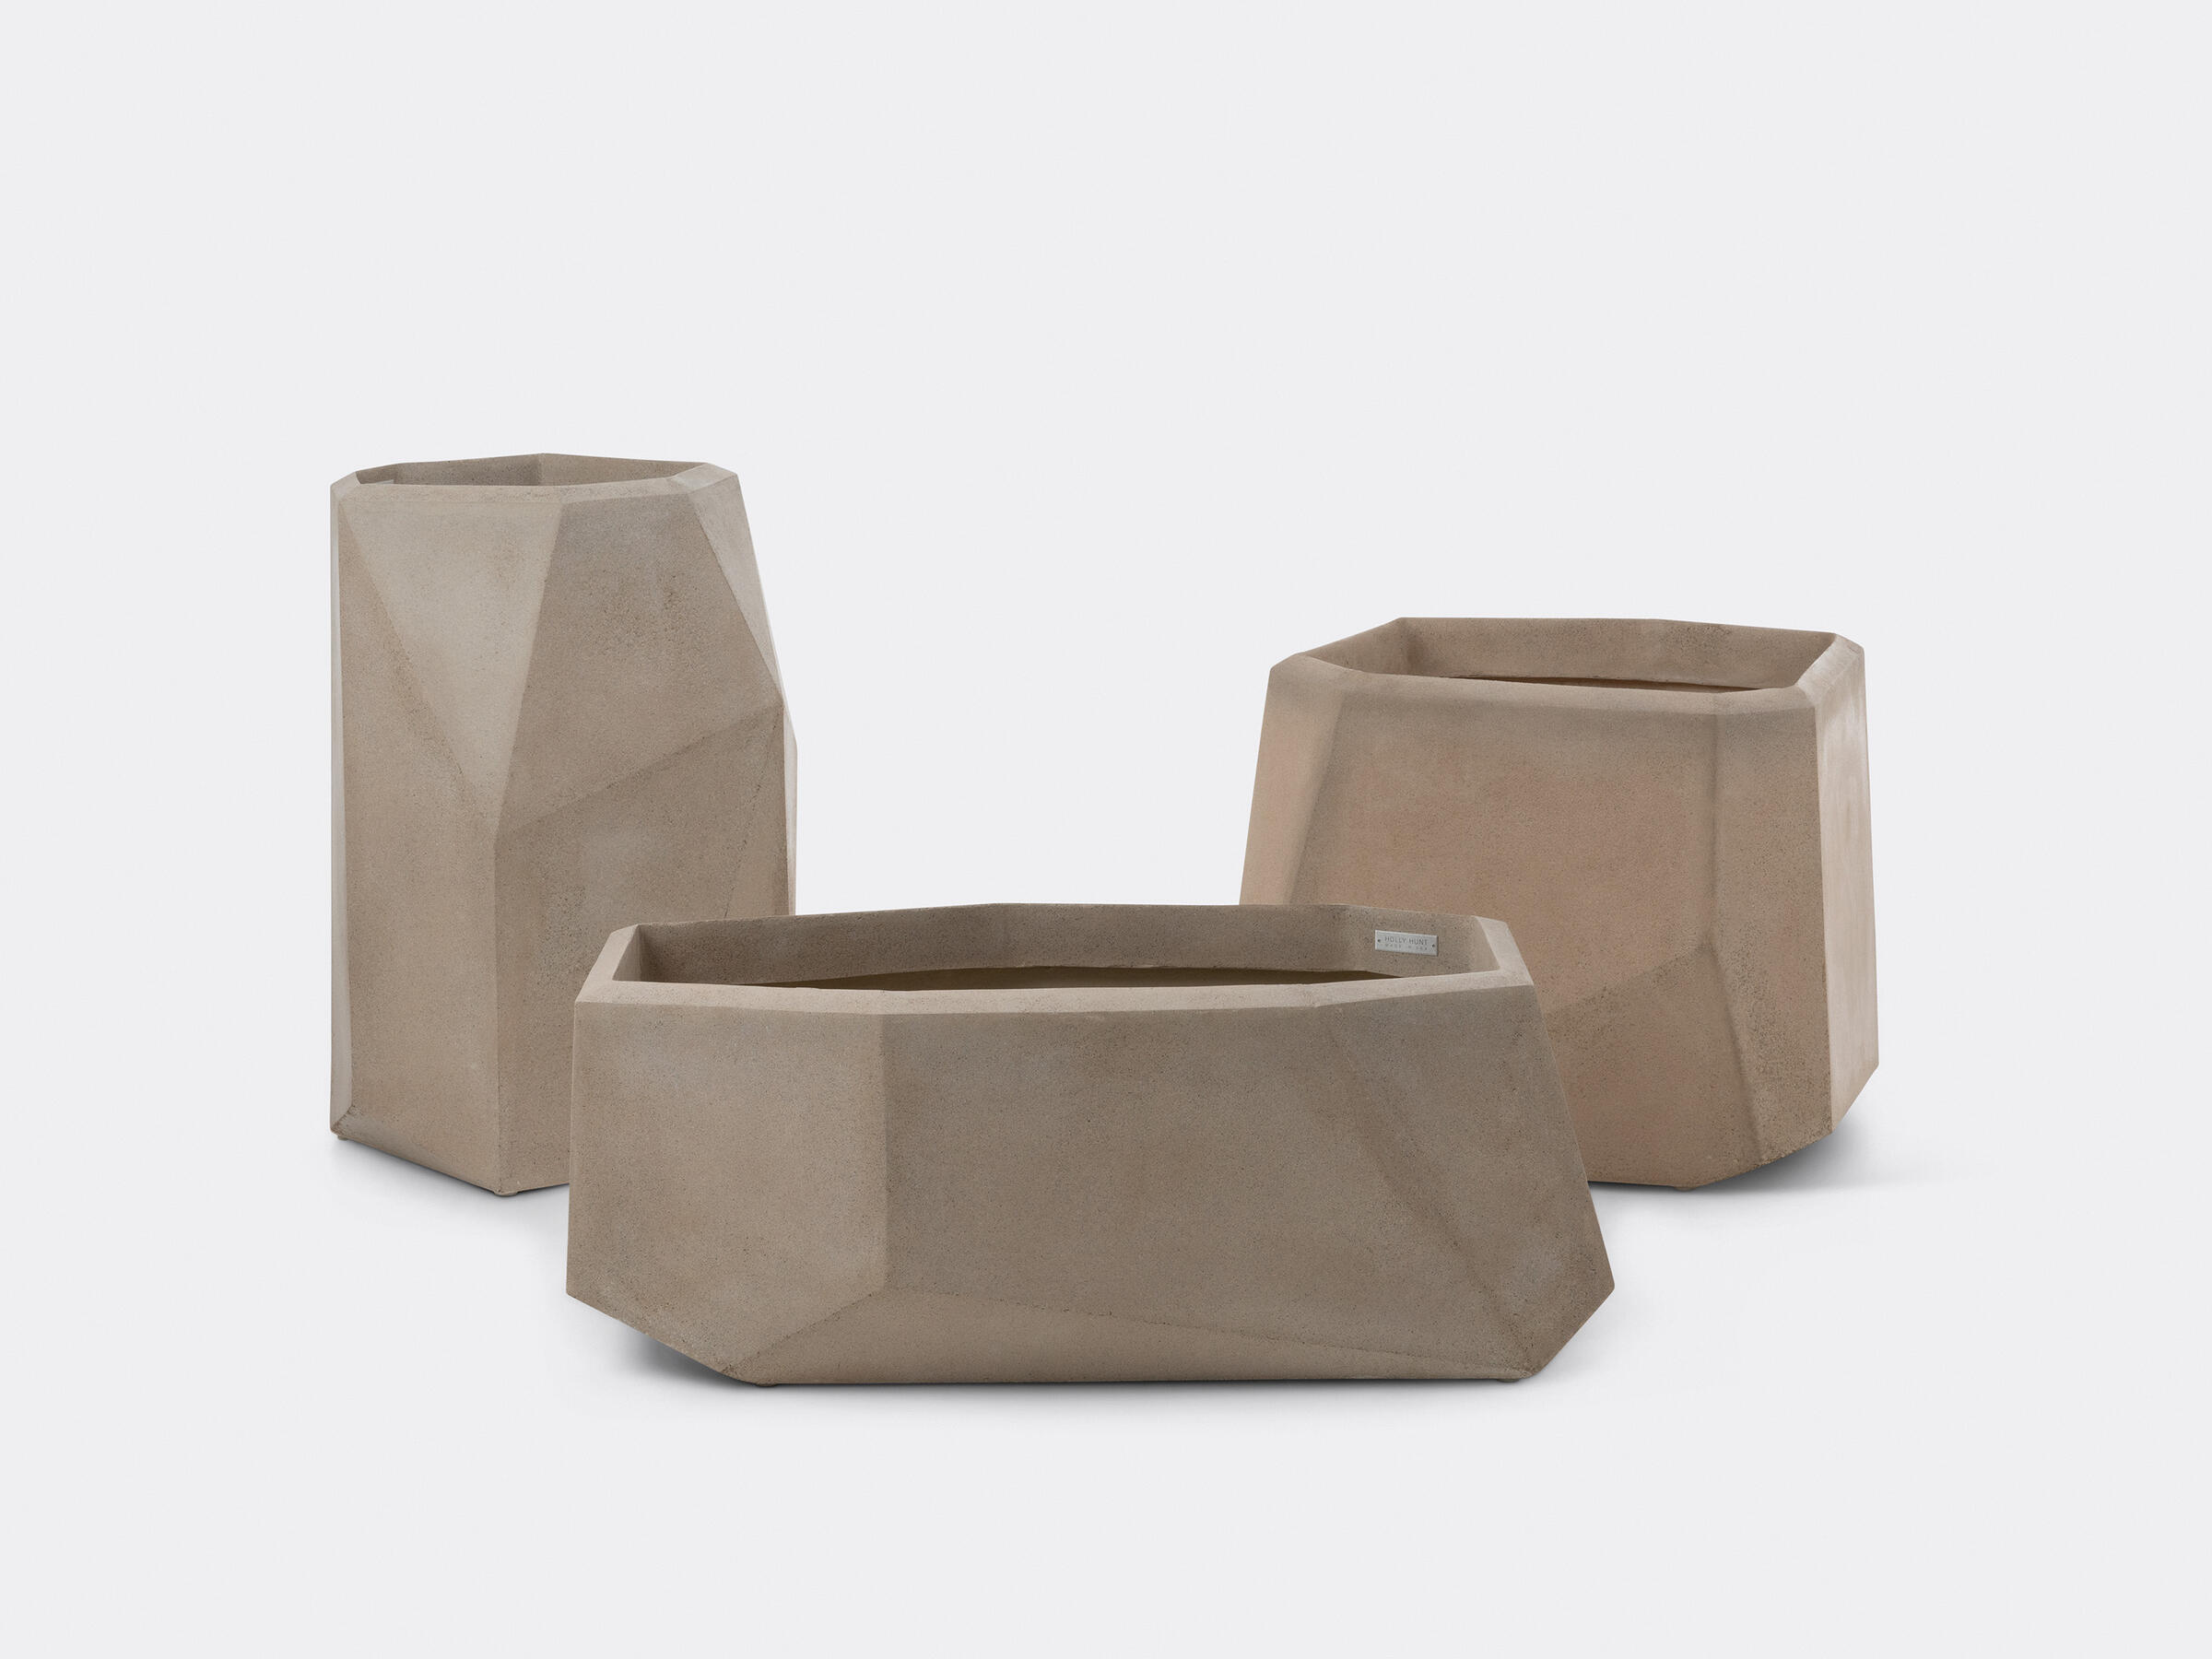 Cachalot Planters, New Aged Stone